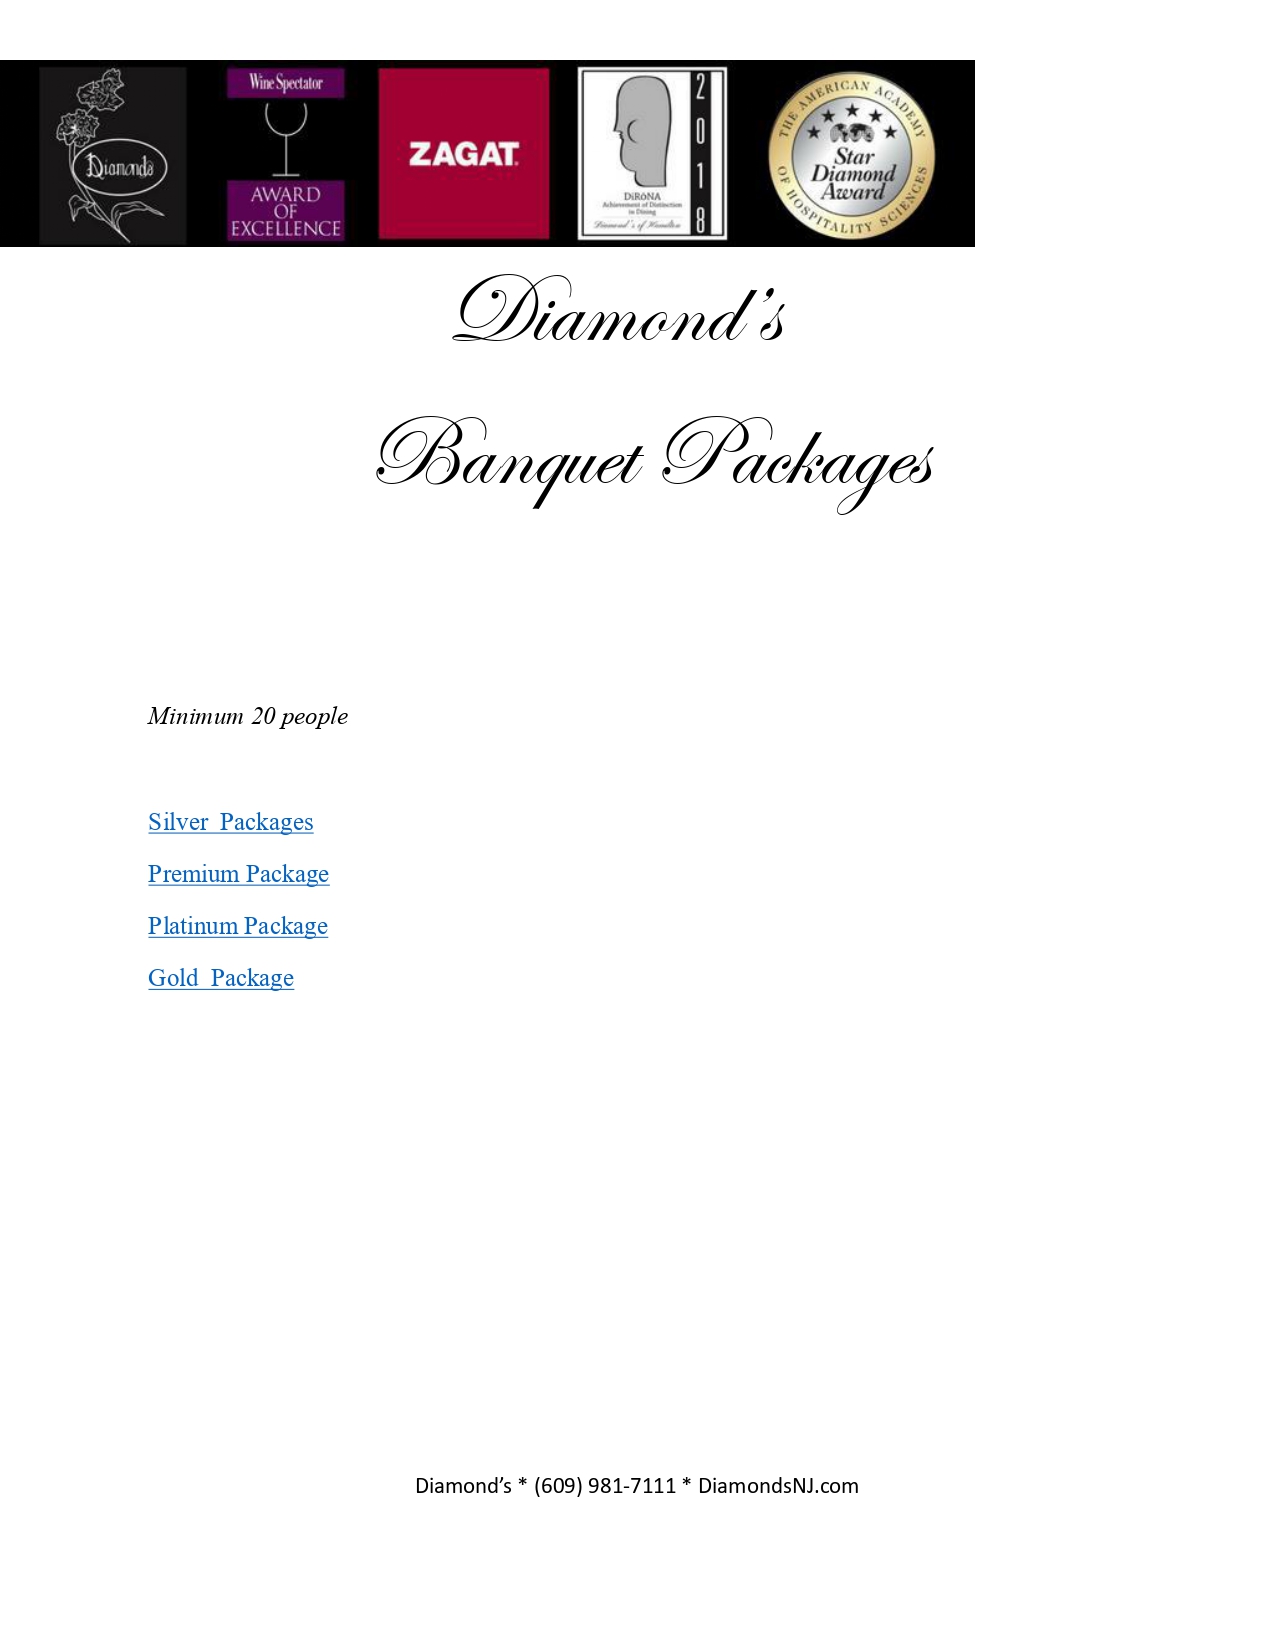 Promotional flyer for diamond's banquet packages featuring logo awards and contact information, with categories listed: silver, platinum, and gold packages.